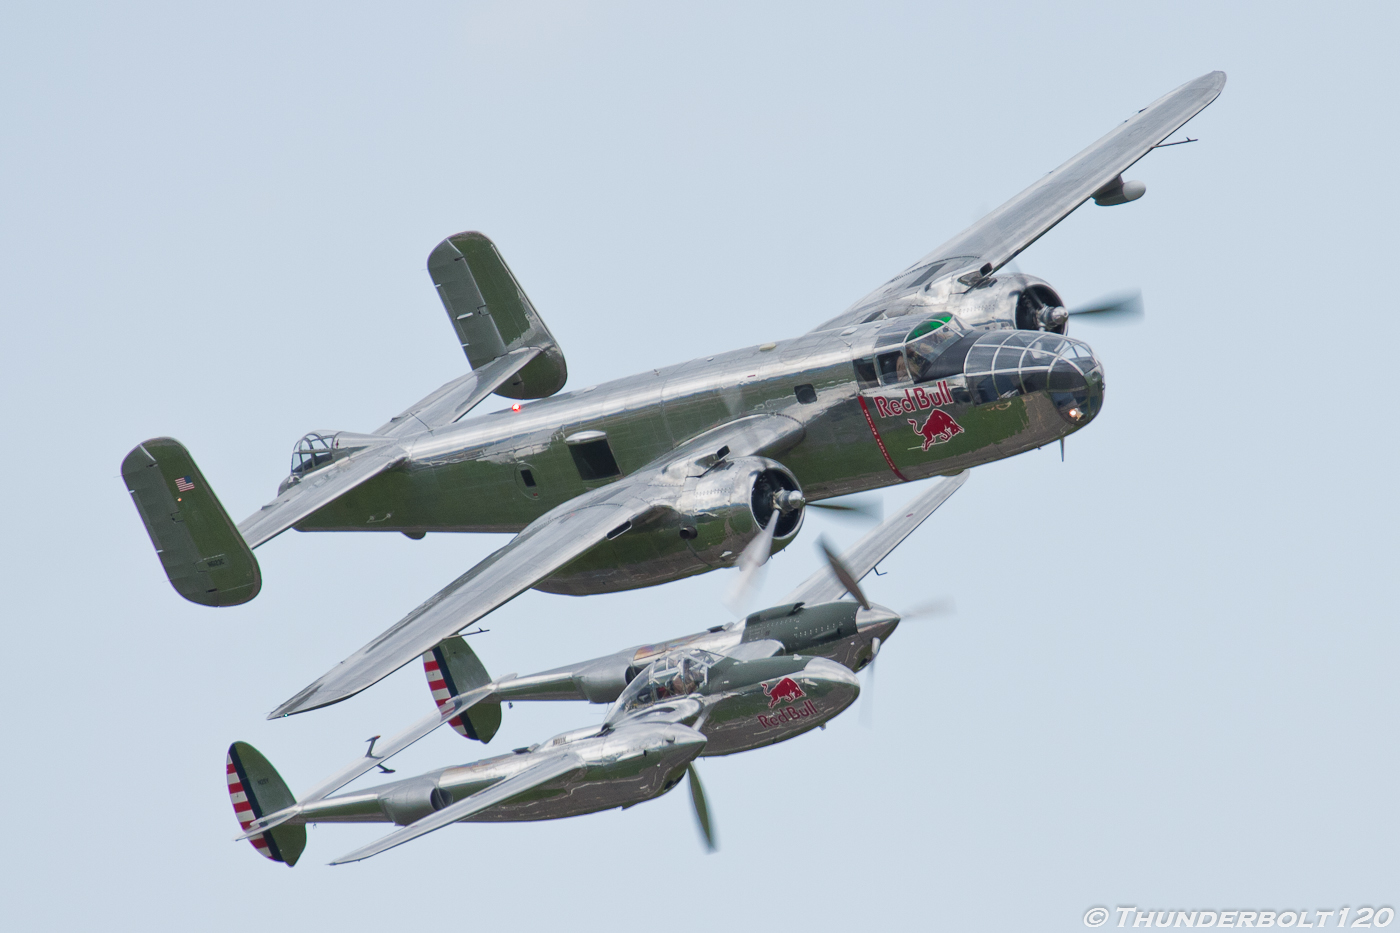 B-25J and P-38